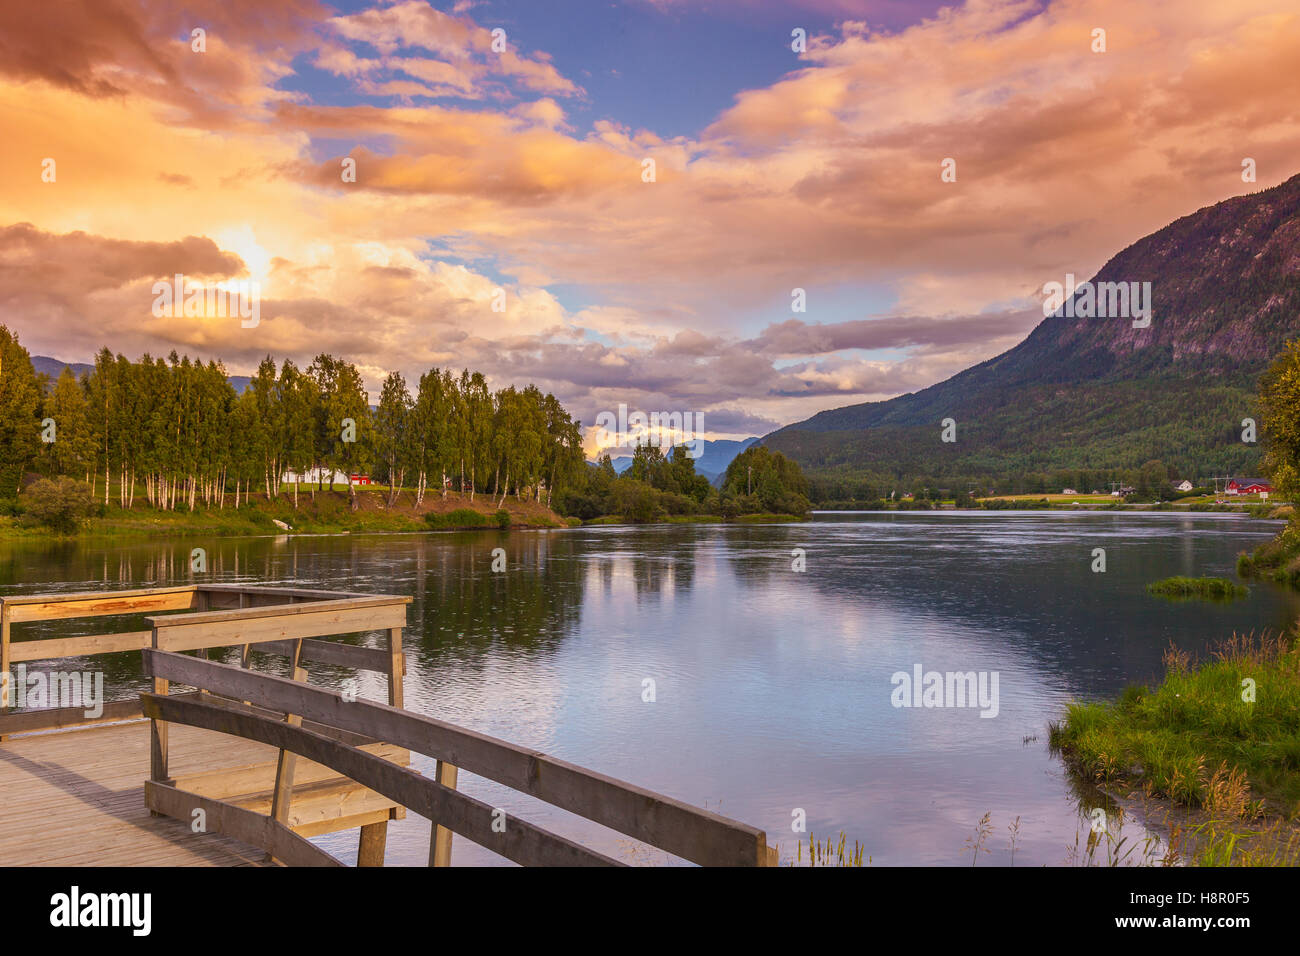 Sunseet pier at lake, pond among mountains under sunset twilight sky. Relaxation serene tranquility, vacations background Stock Photo